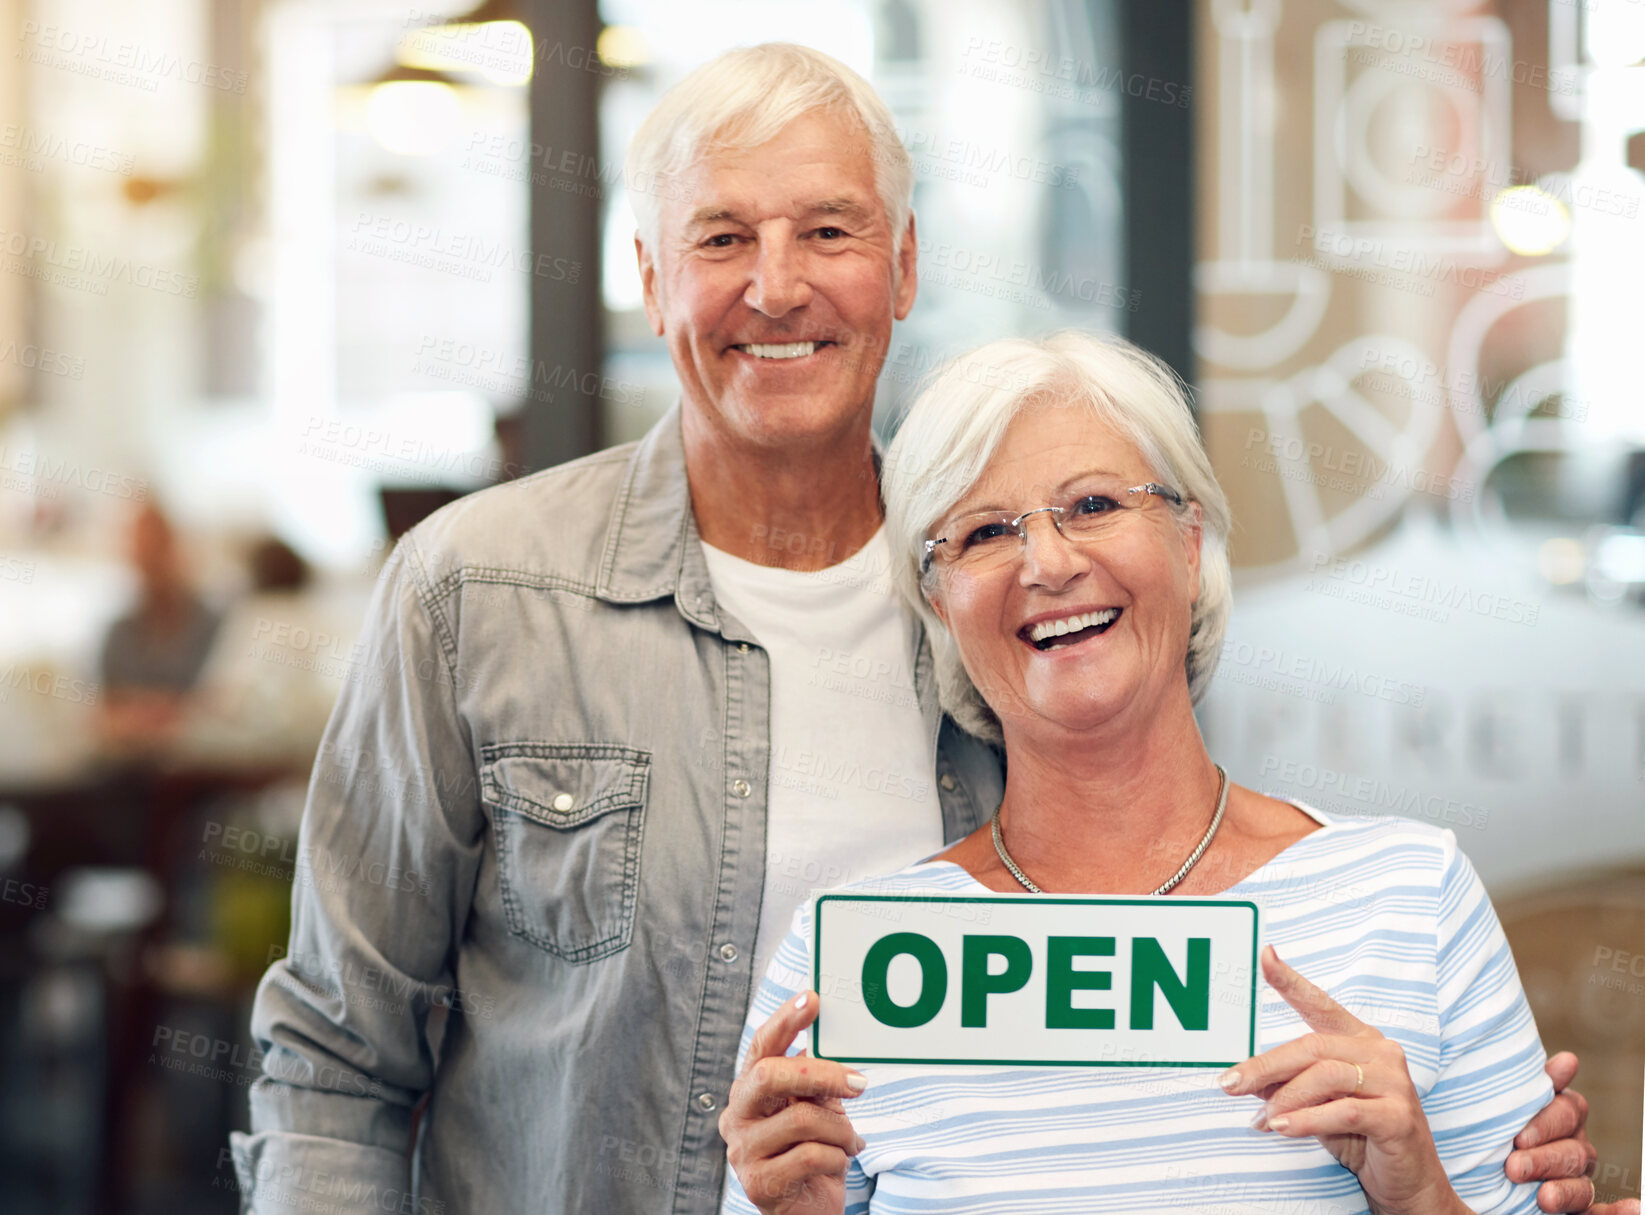 Buy stock photo Portrait of a happy senior couple holding up an open sign in their store